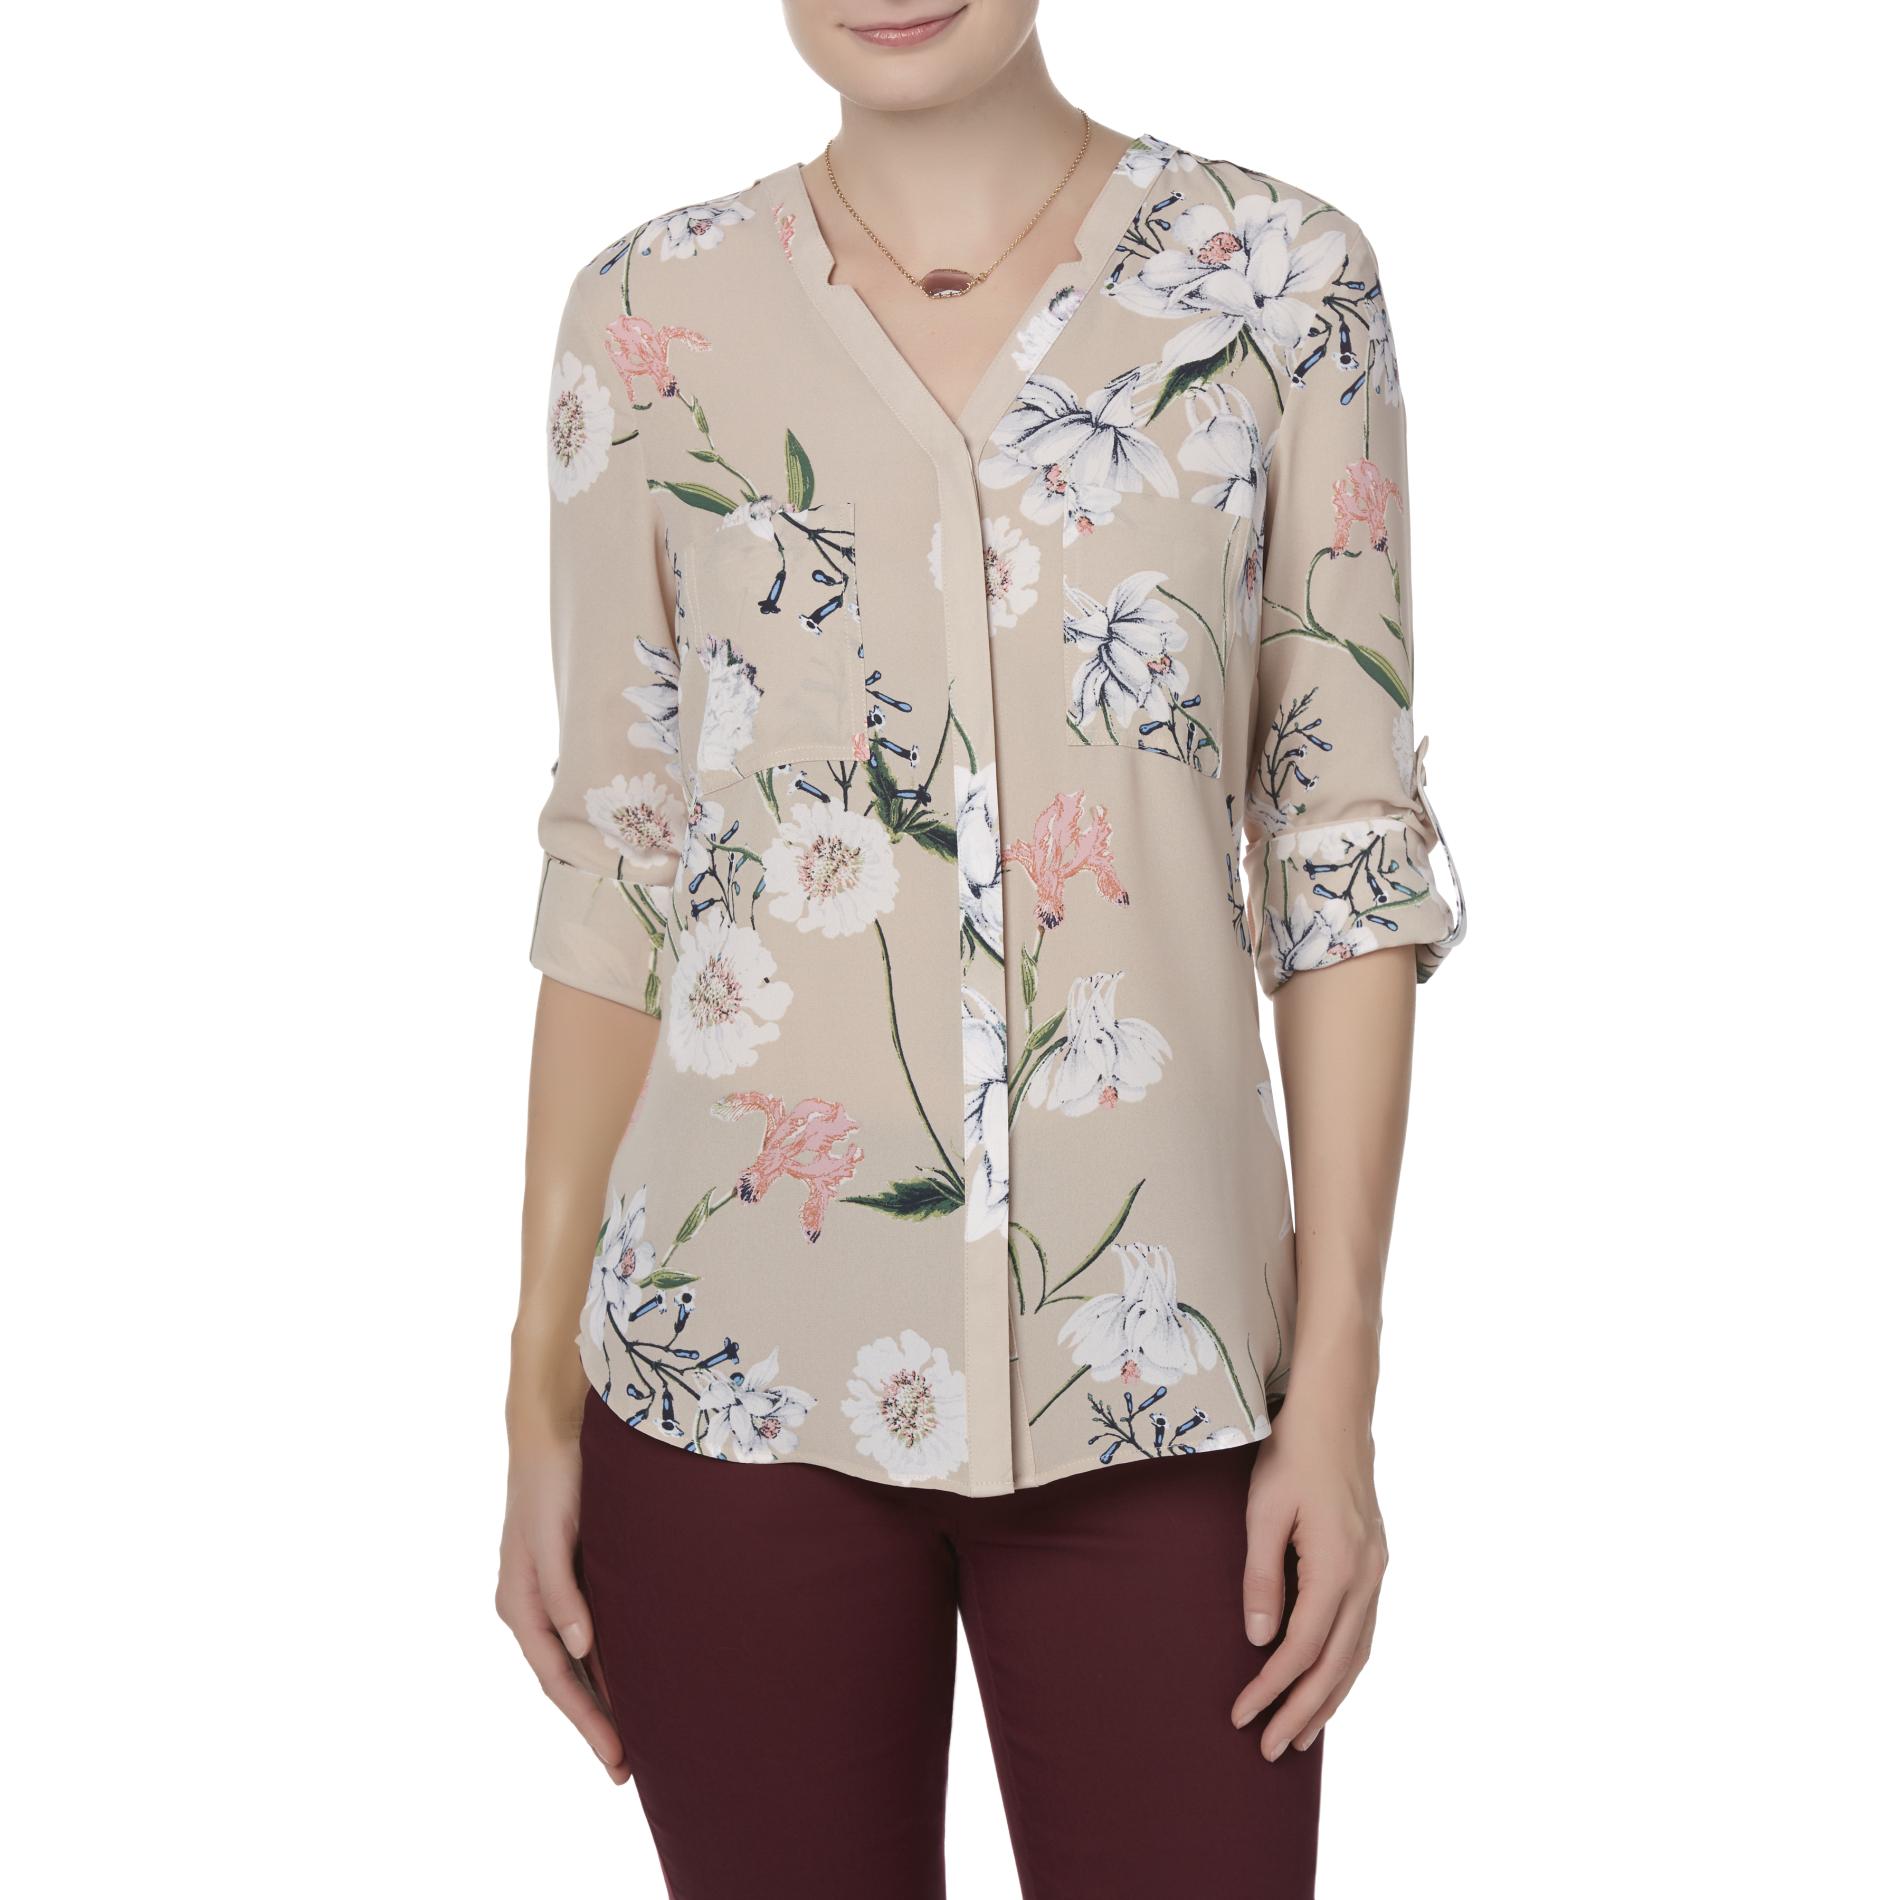 Simply Styled Petites' Utility Blouse - Floral